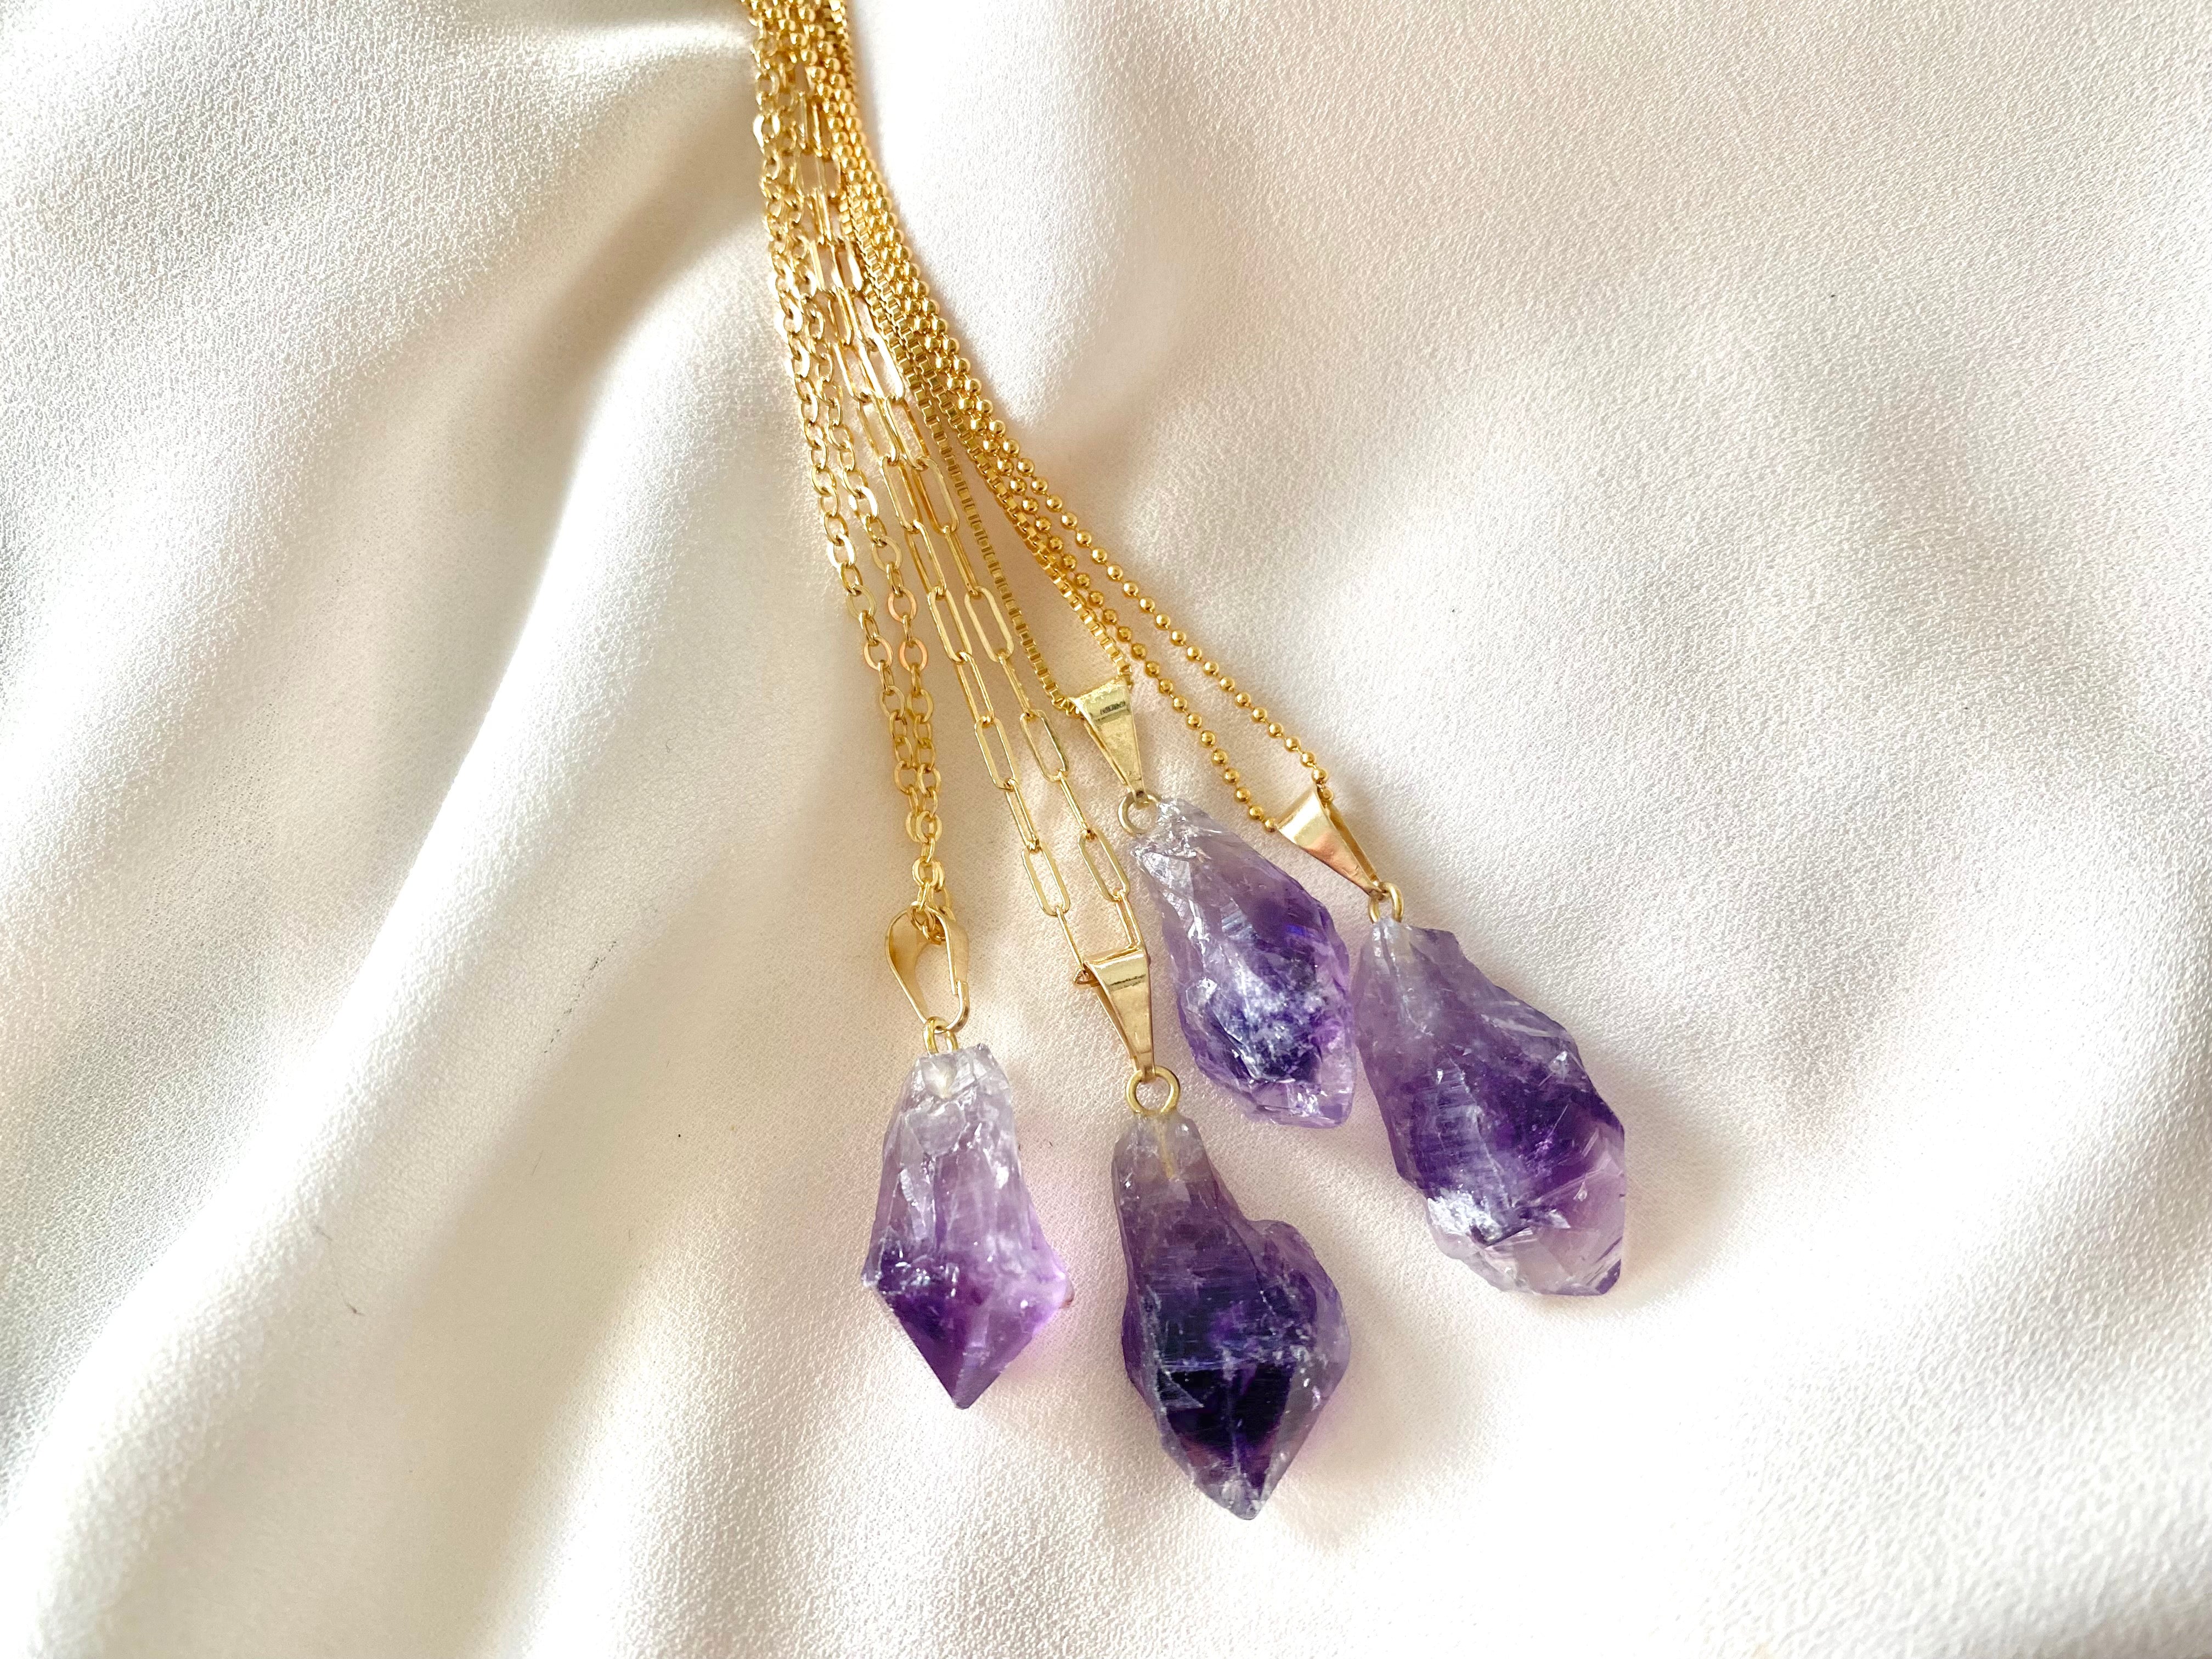 Raw Ombre Amethyst Pendant Necklace - February Birthstone - Gold